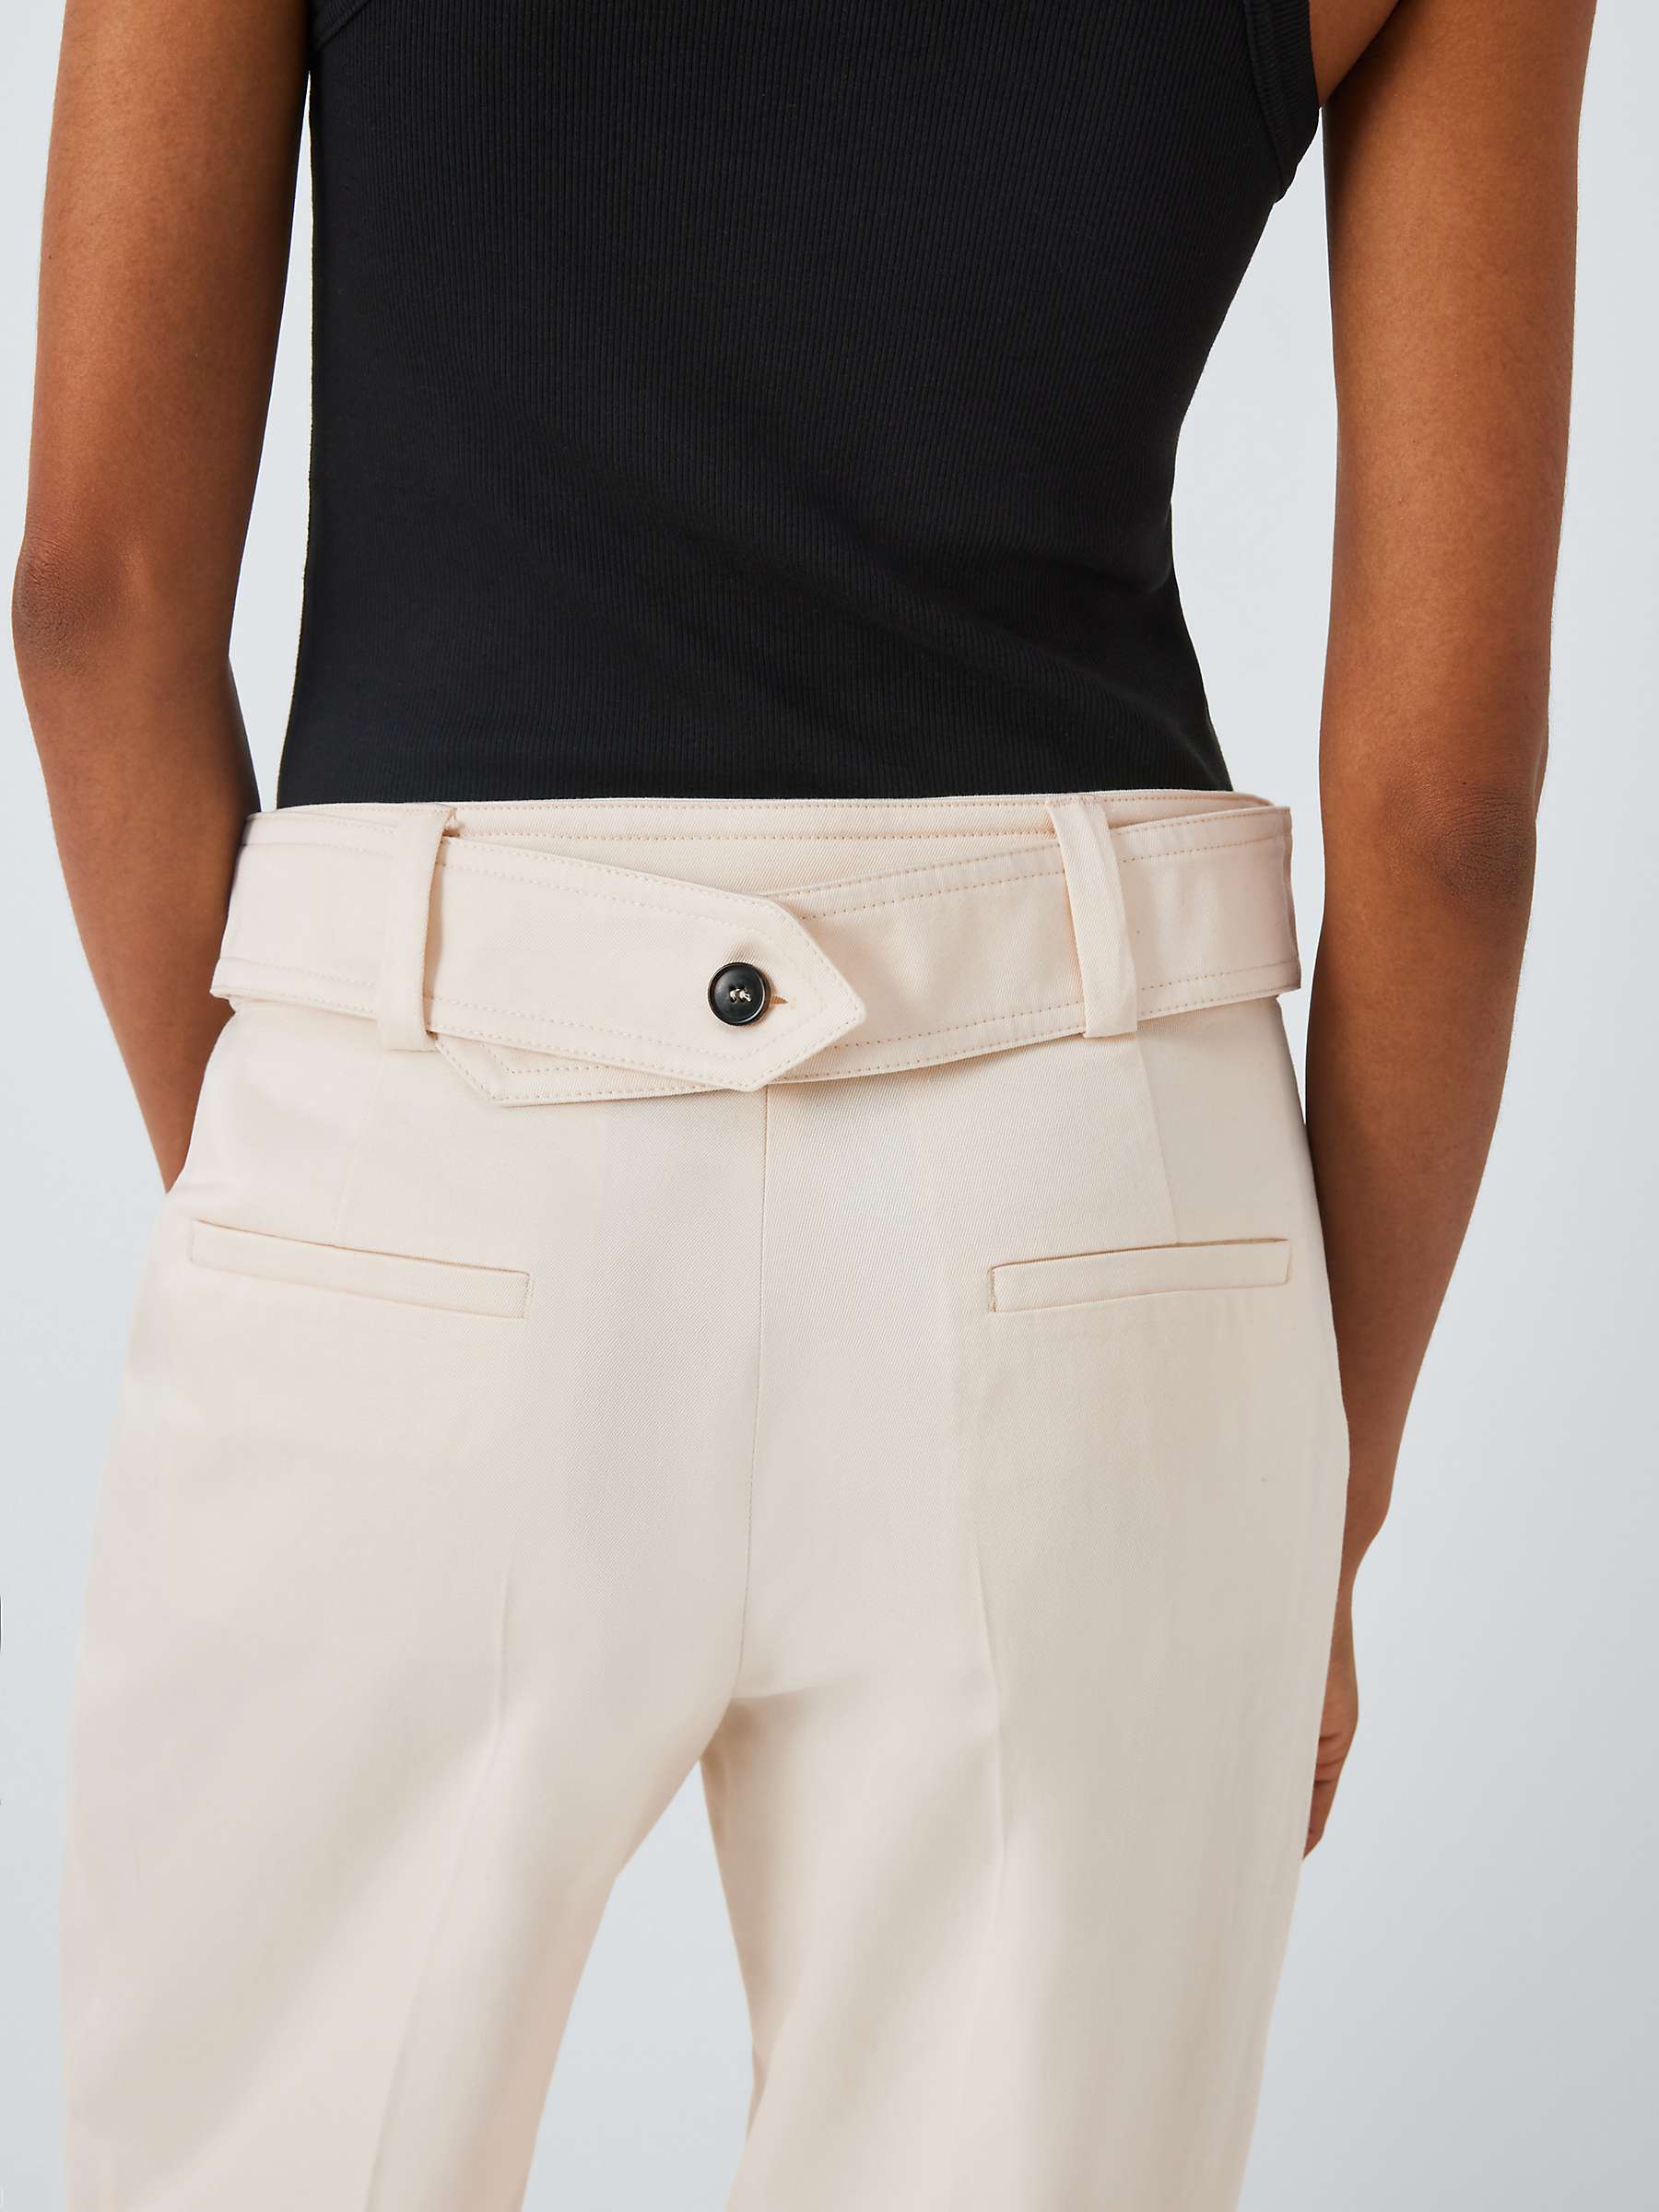 Buy Weekend MaxMara Livigno Trousers, Ivory Online at johnlewis.com